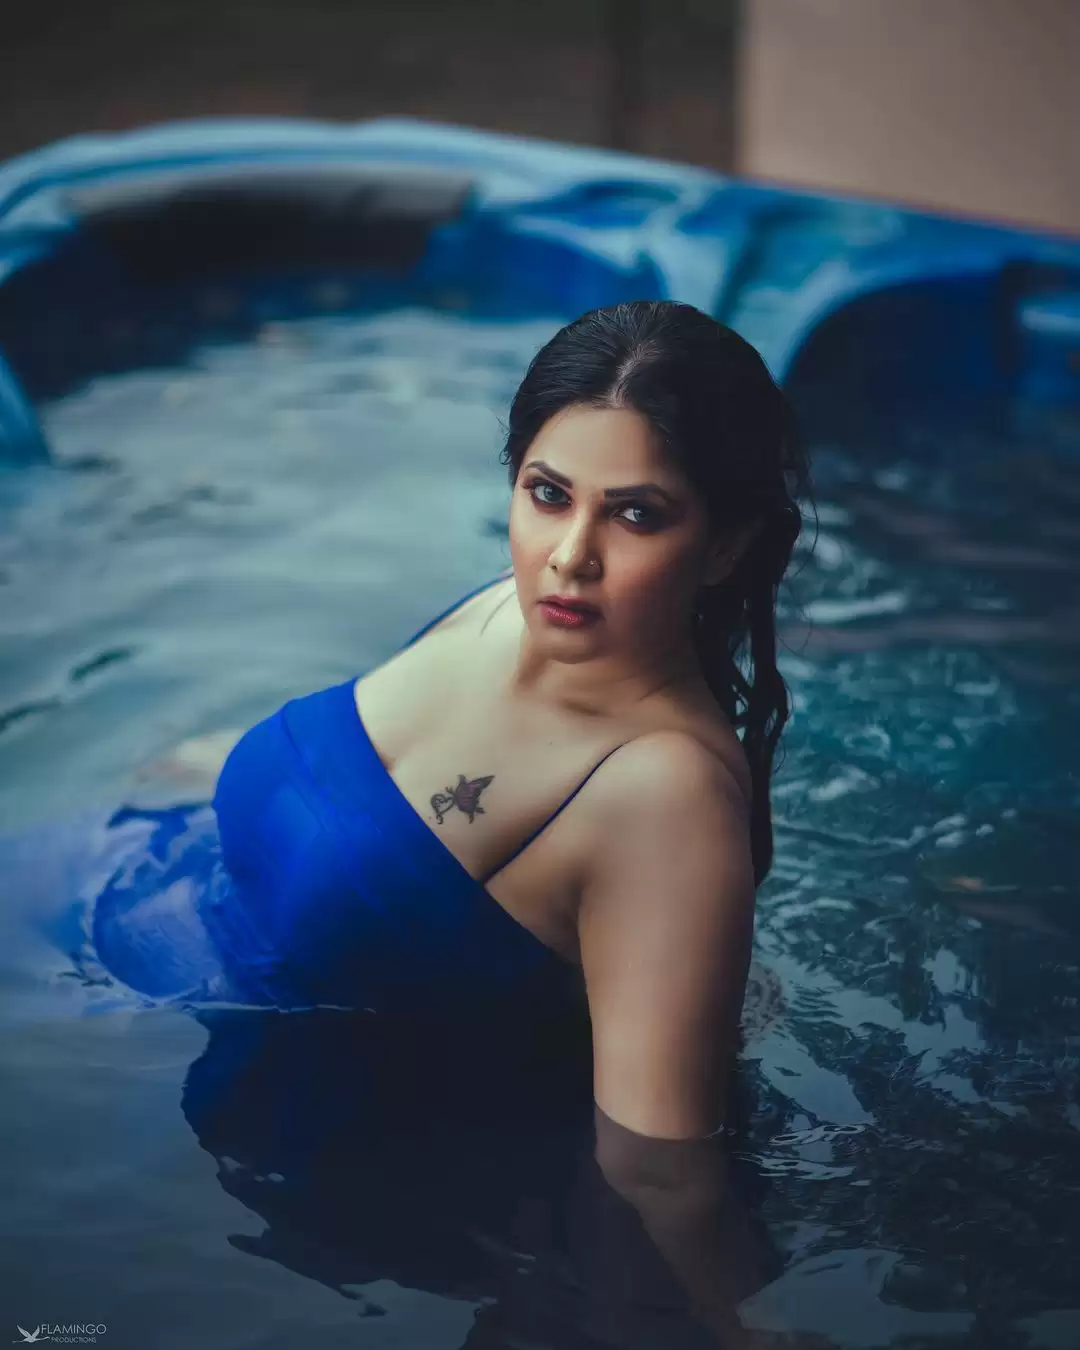 Aabha Paul’s bewitching pictures go viral on the internet